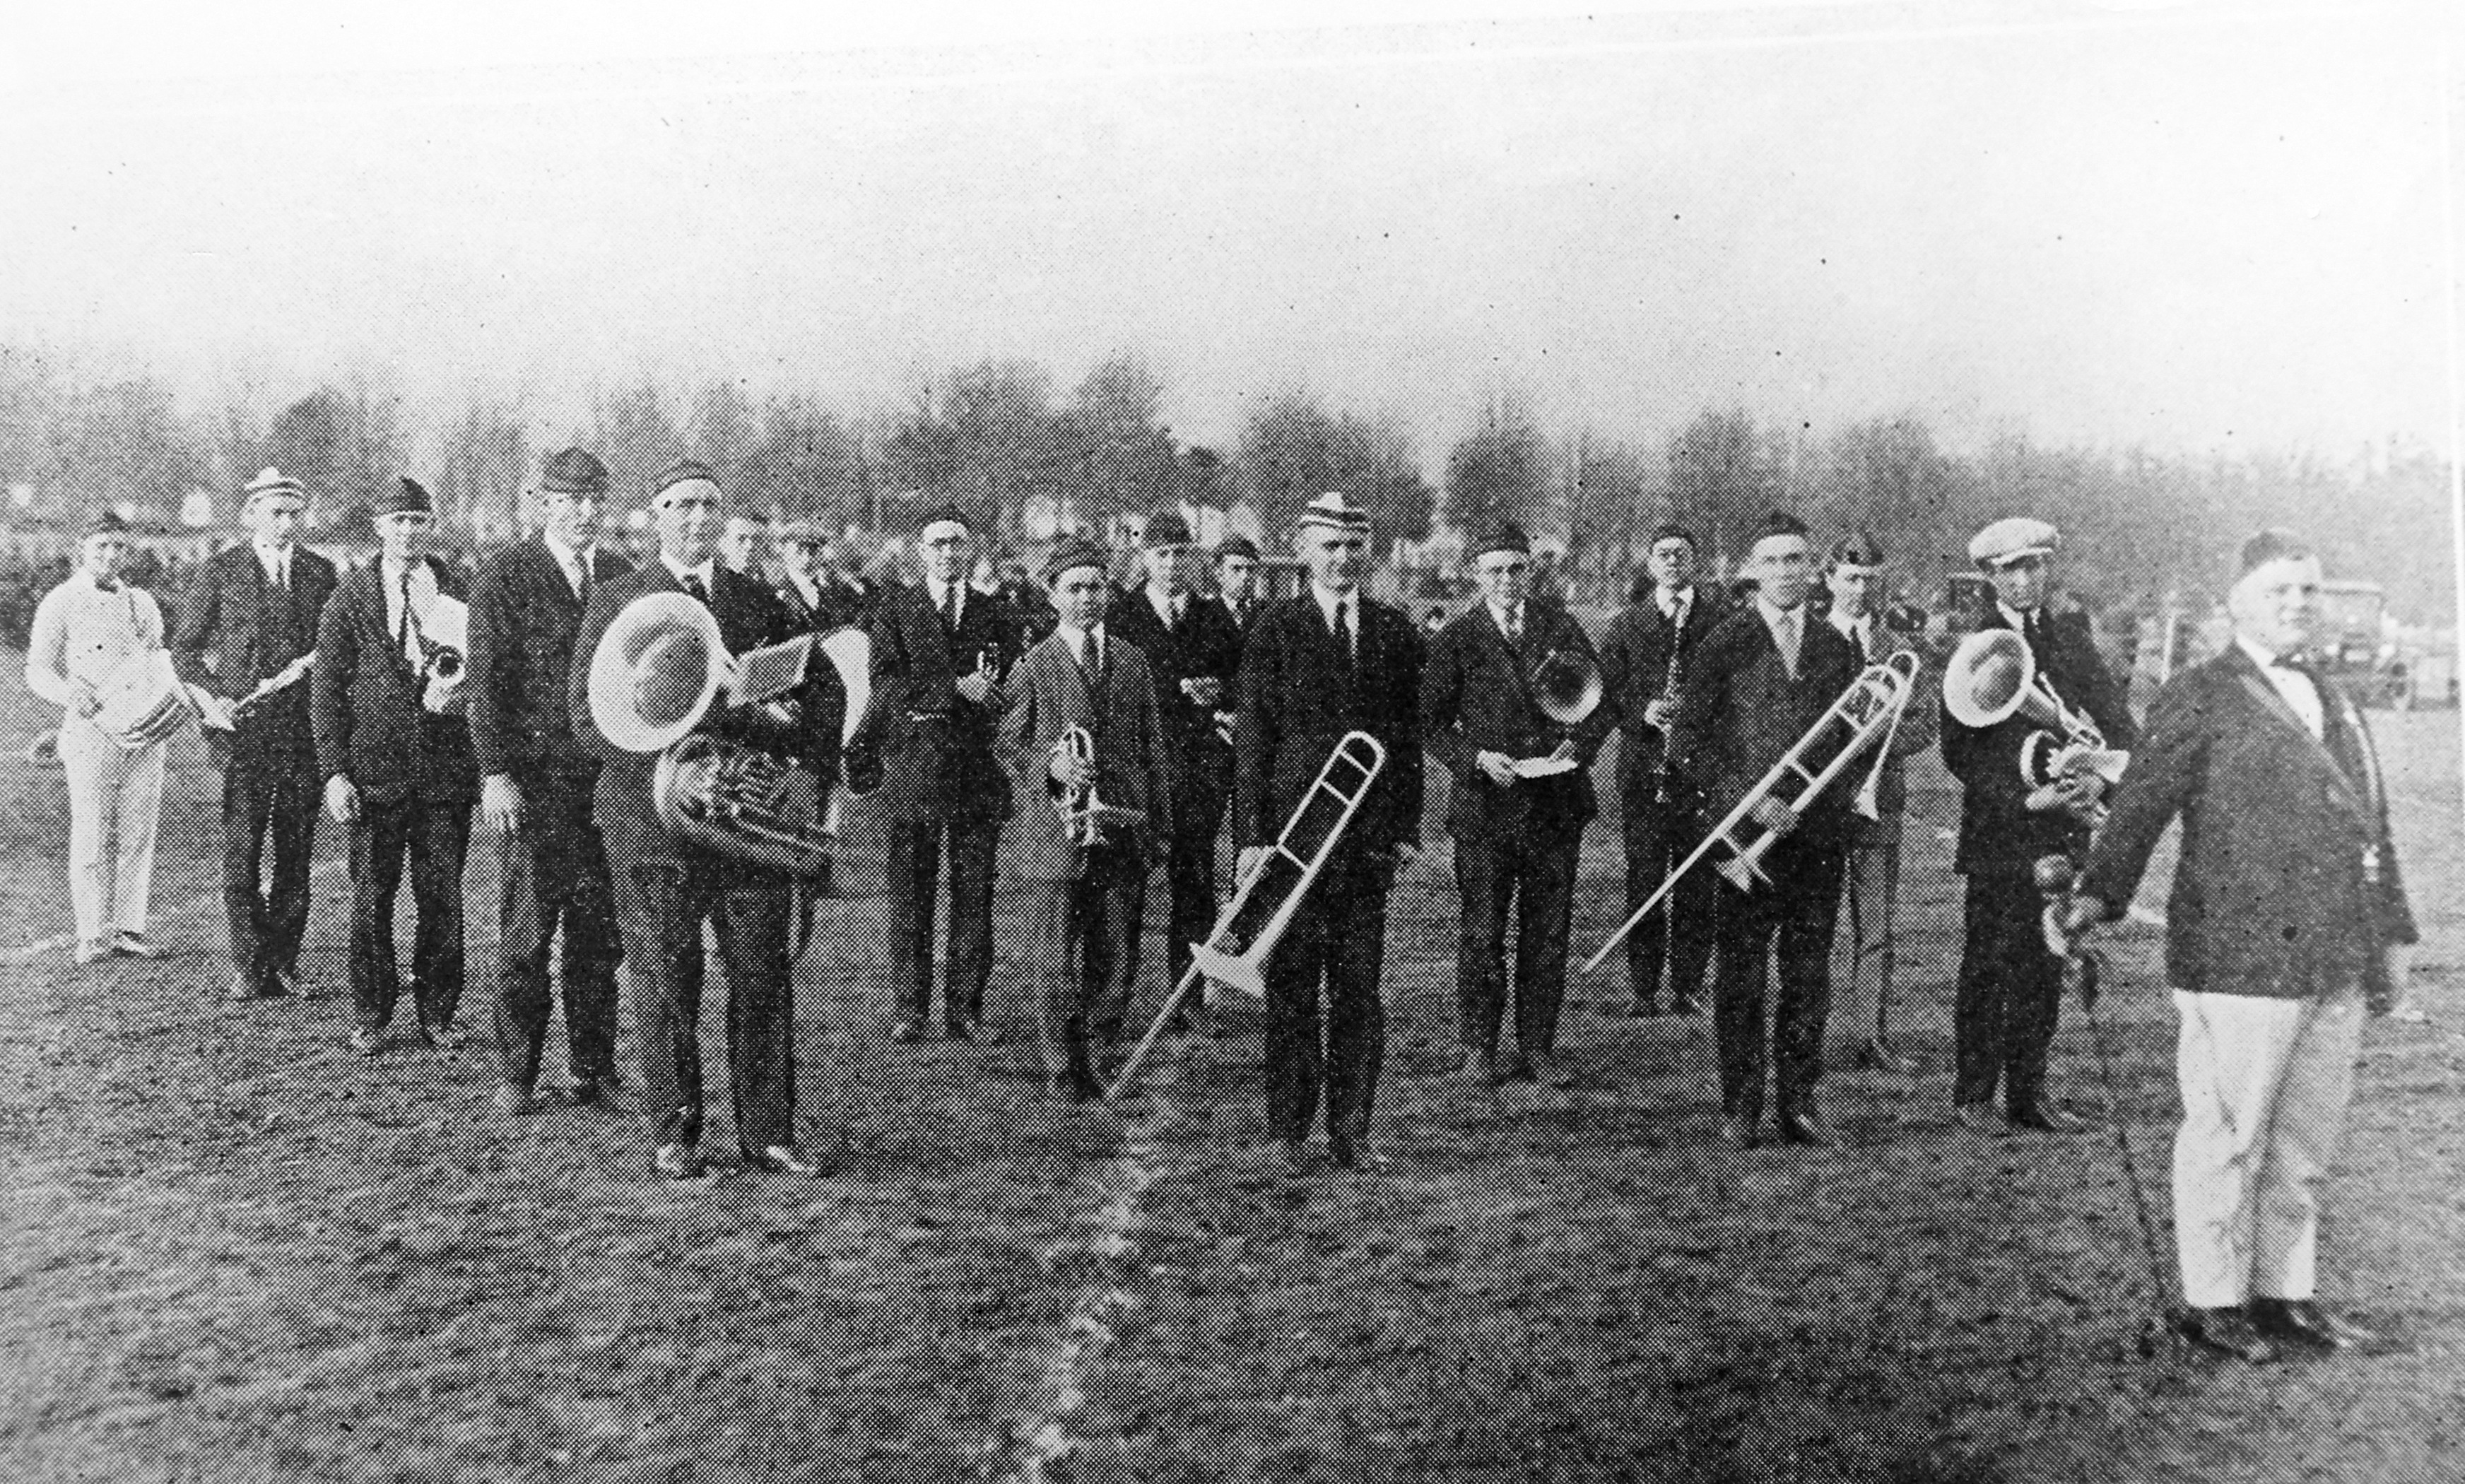 A group of 17 marching band musicians and a director stands on the field at Bowling Green State Normal College in 1923.